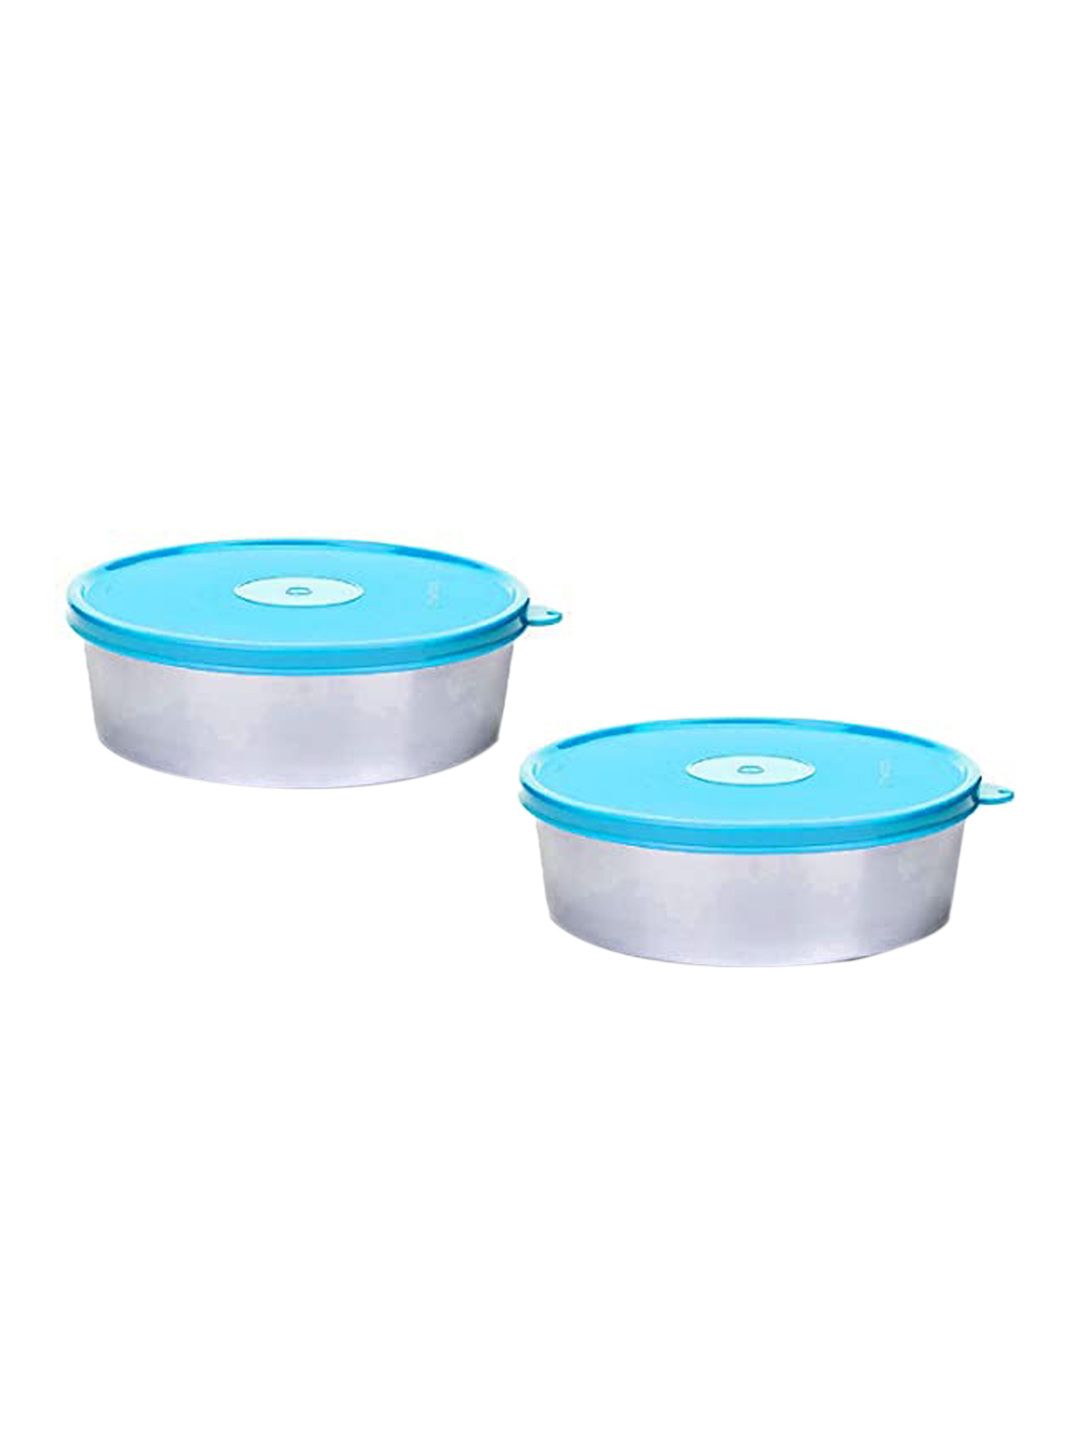 SignoraWare Set Of 2 Solid Food Container With Lid Price in India